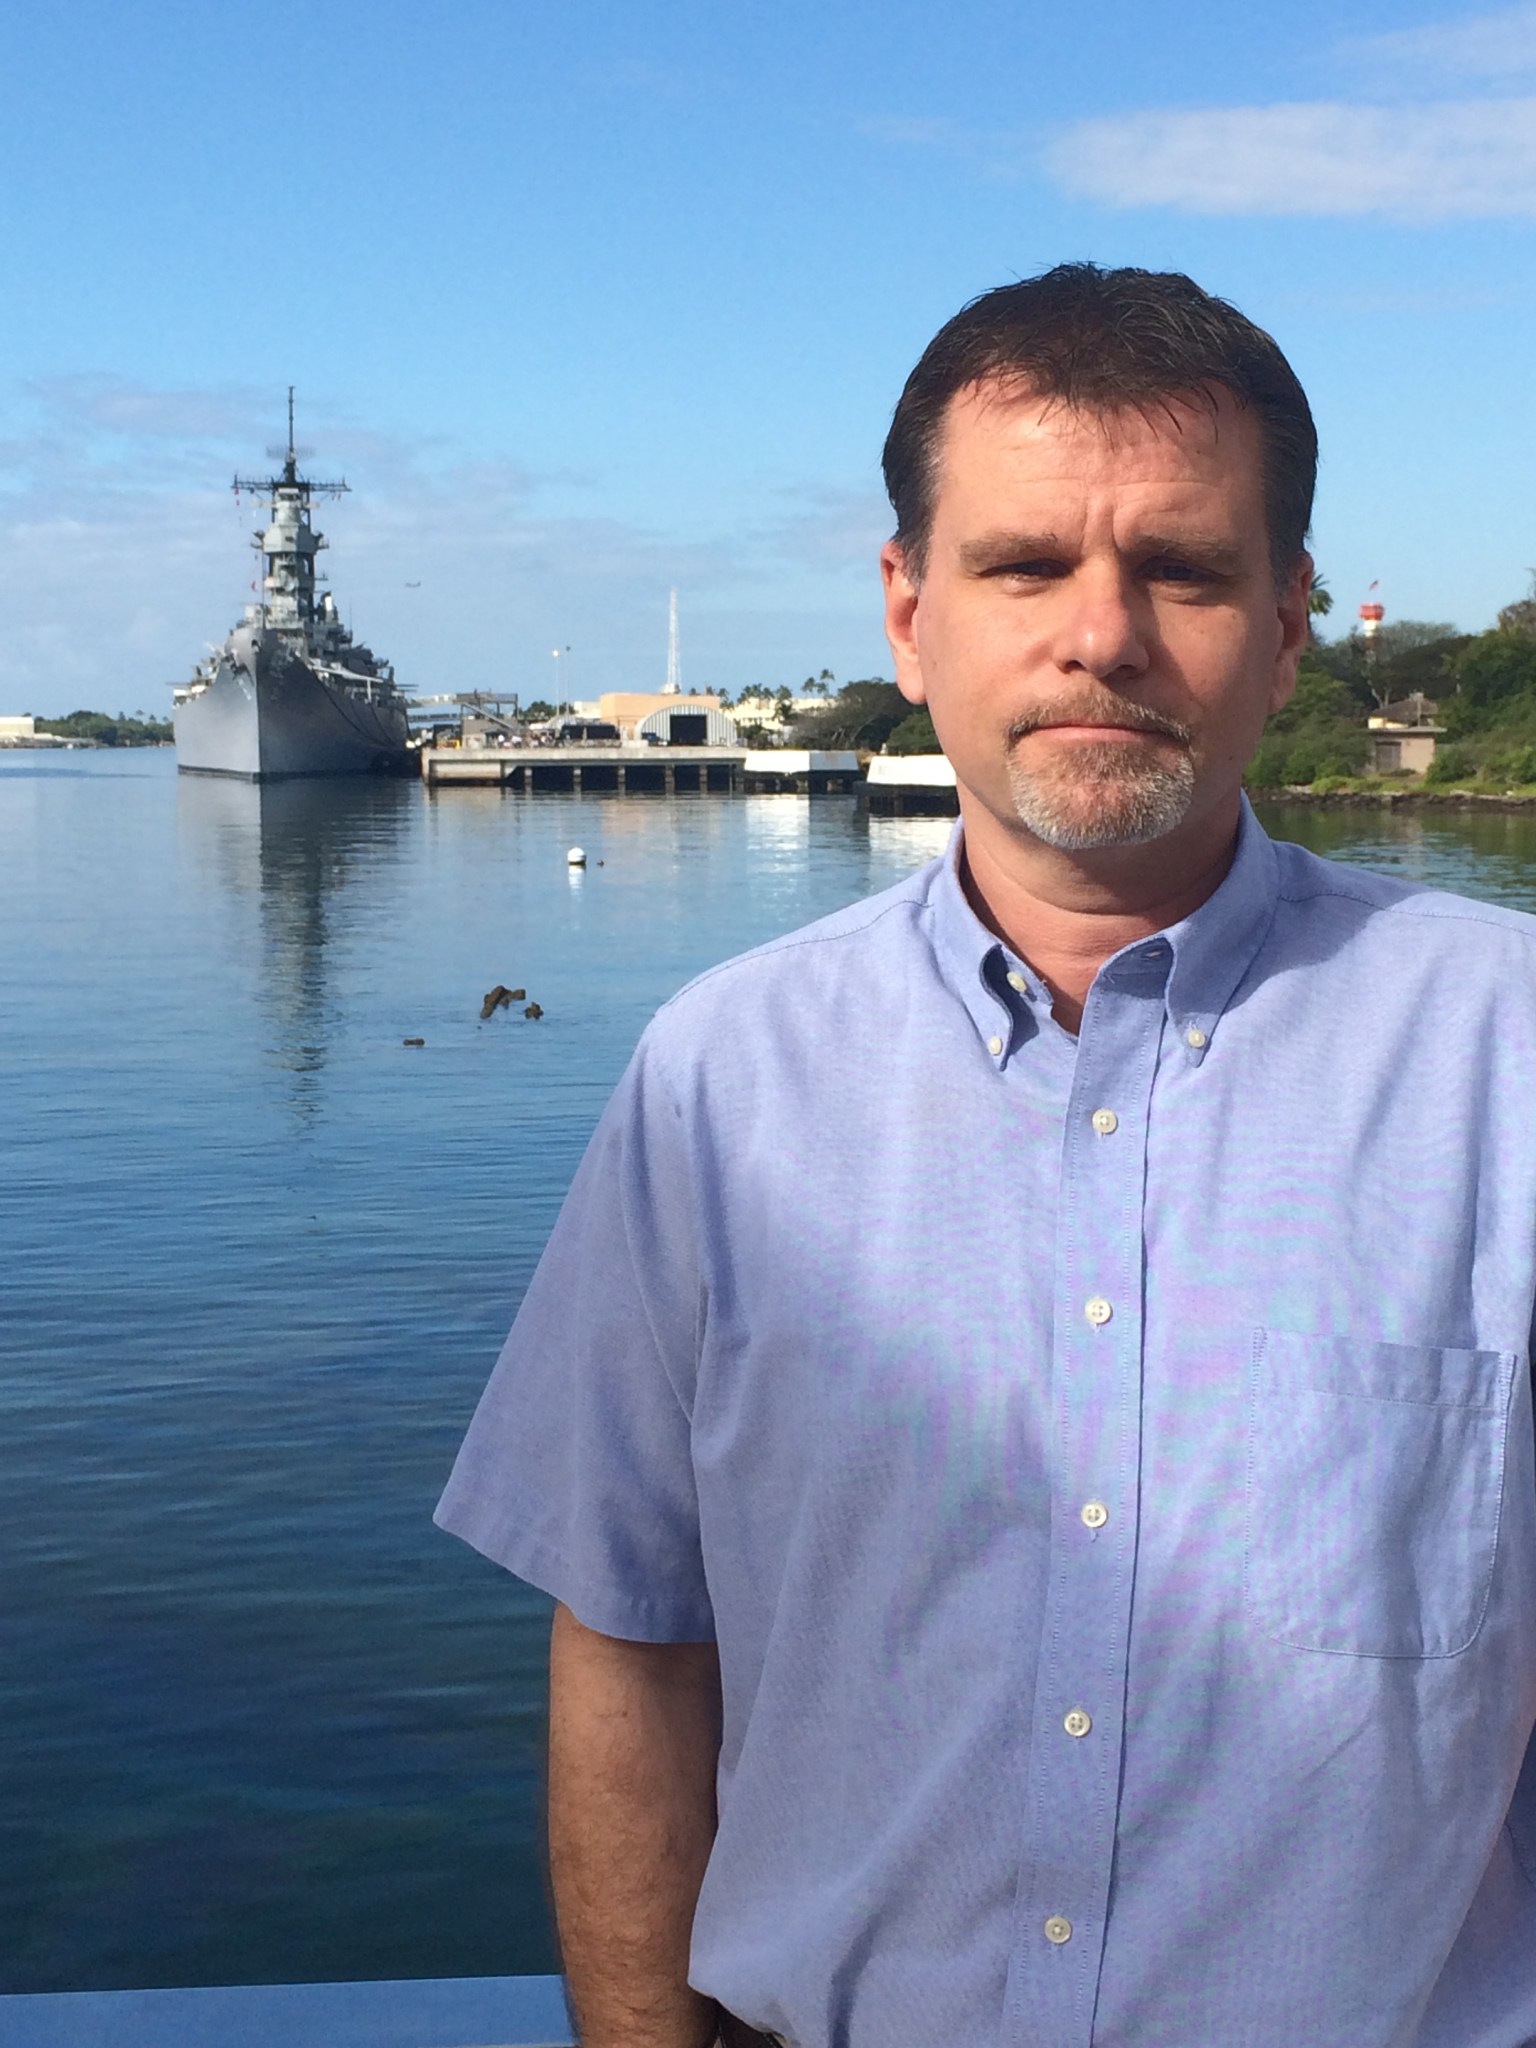 Wilcox at Pearl Harbor while on travel for the LDSD project (Low Density Supersonic Decelerators).